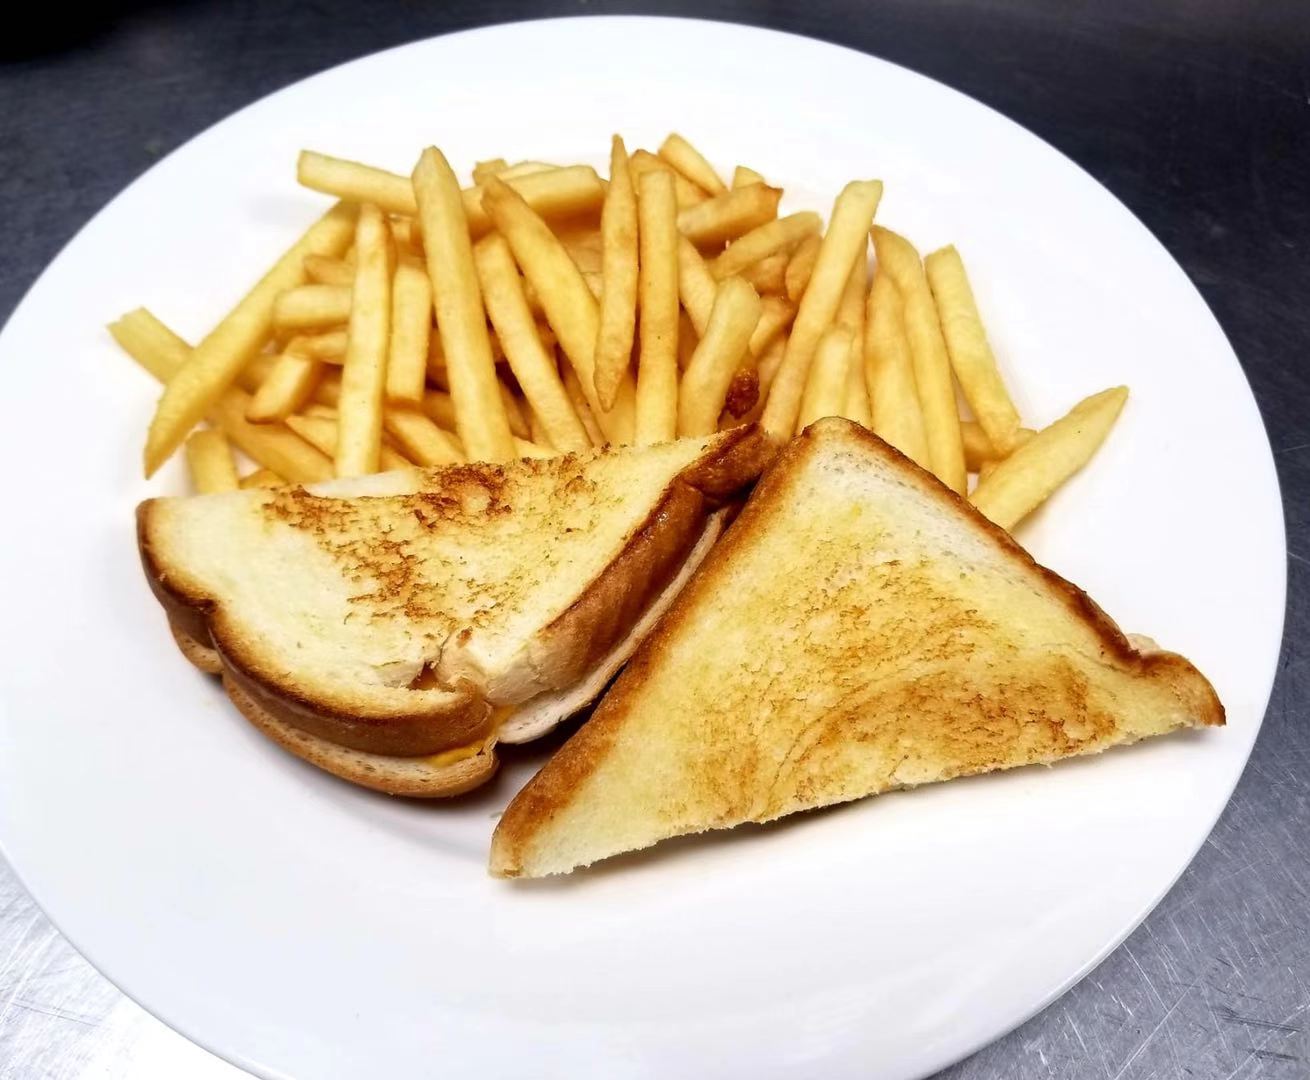 271. Grilled Cheese Sandwich with Fries